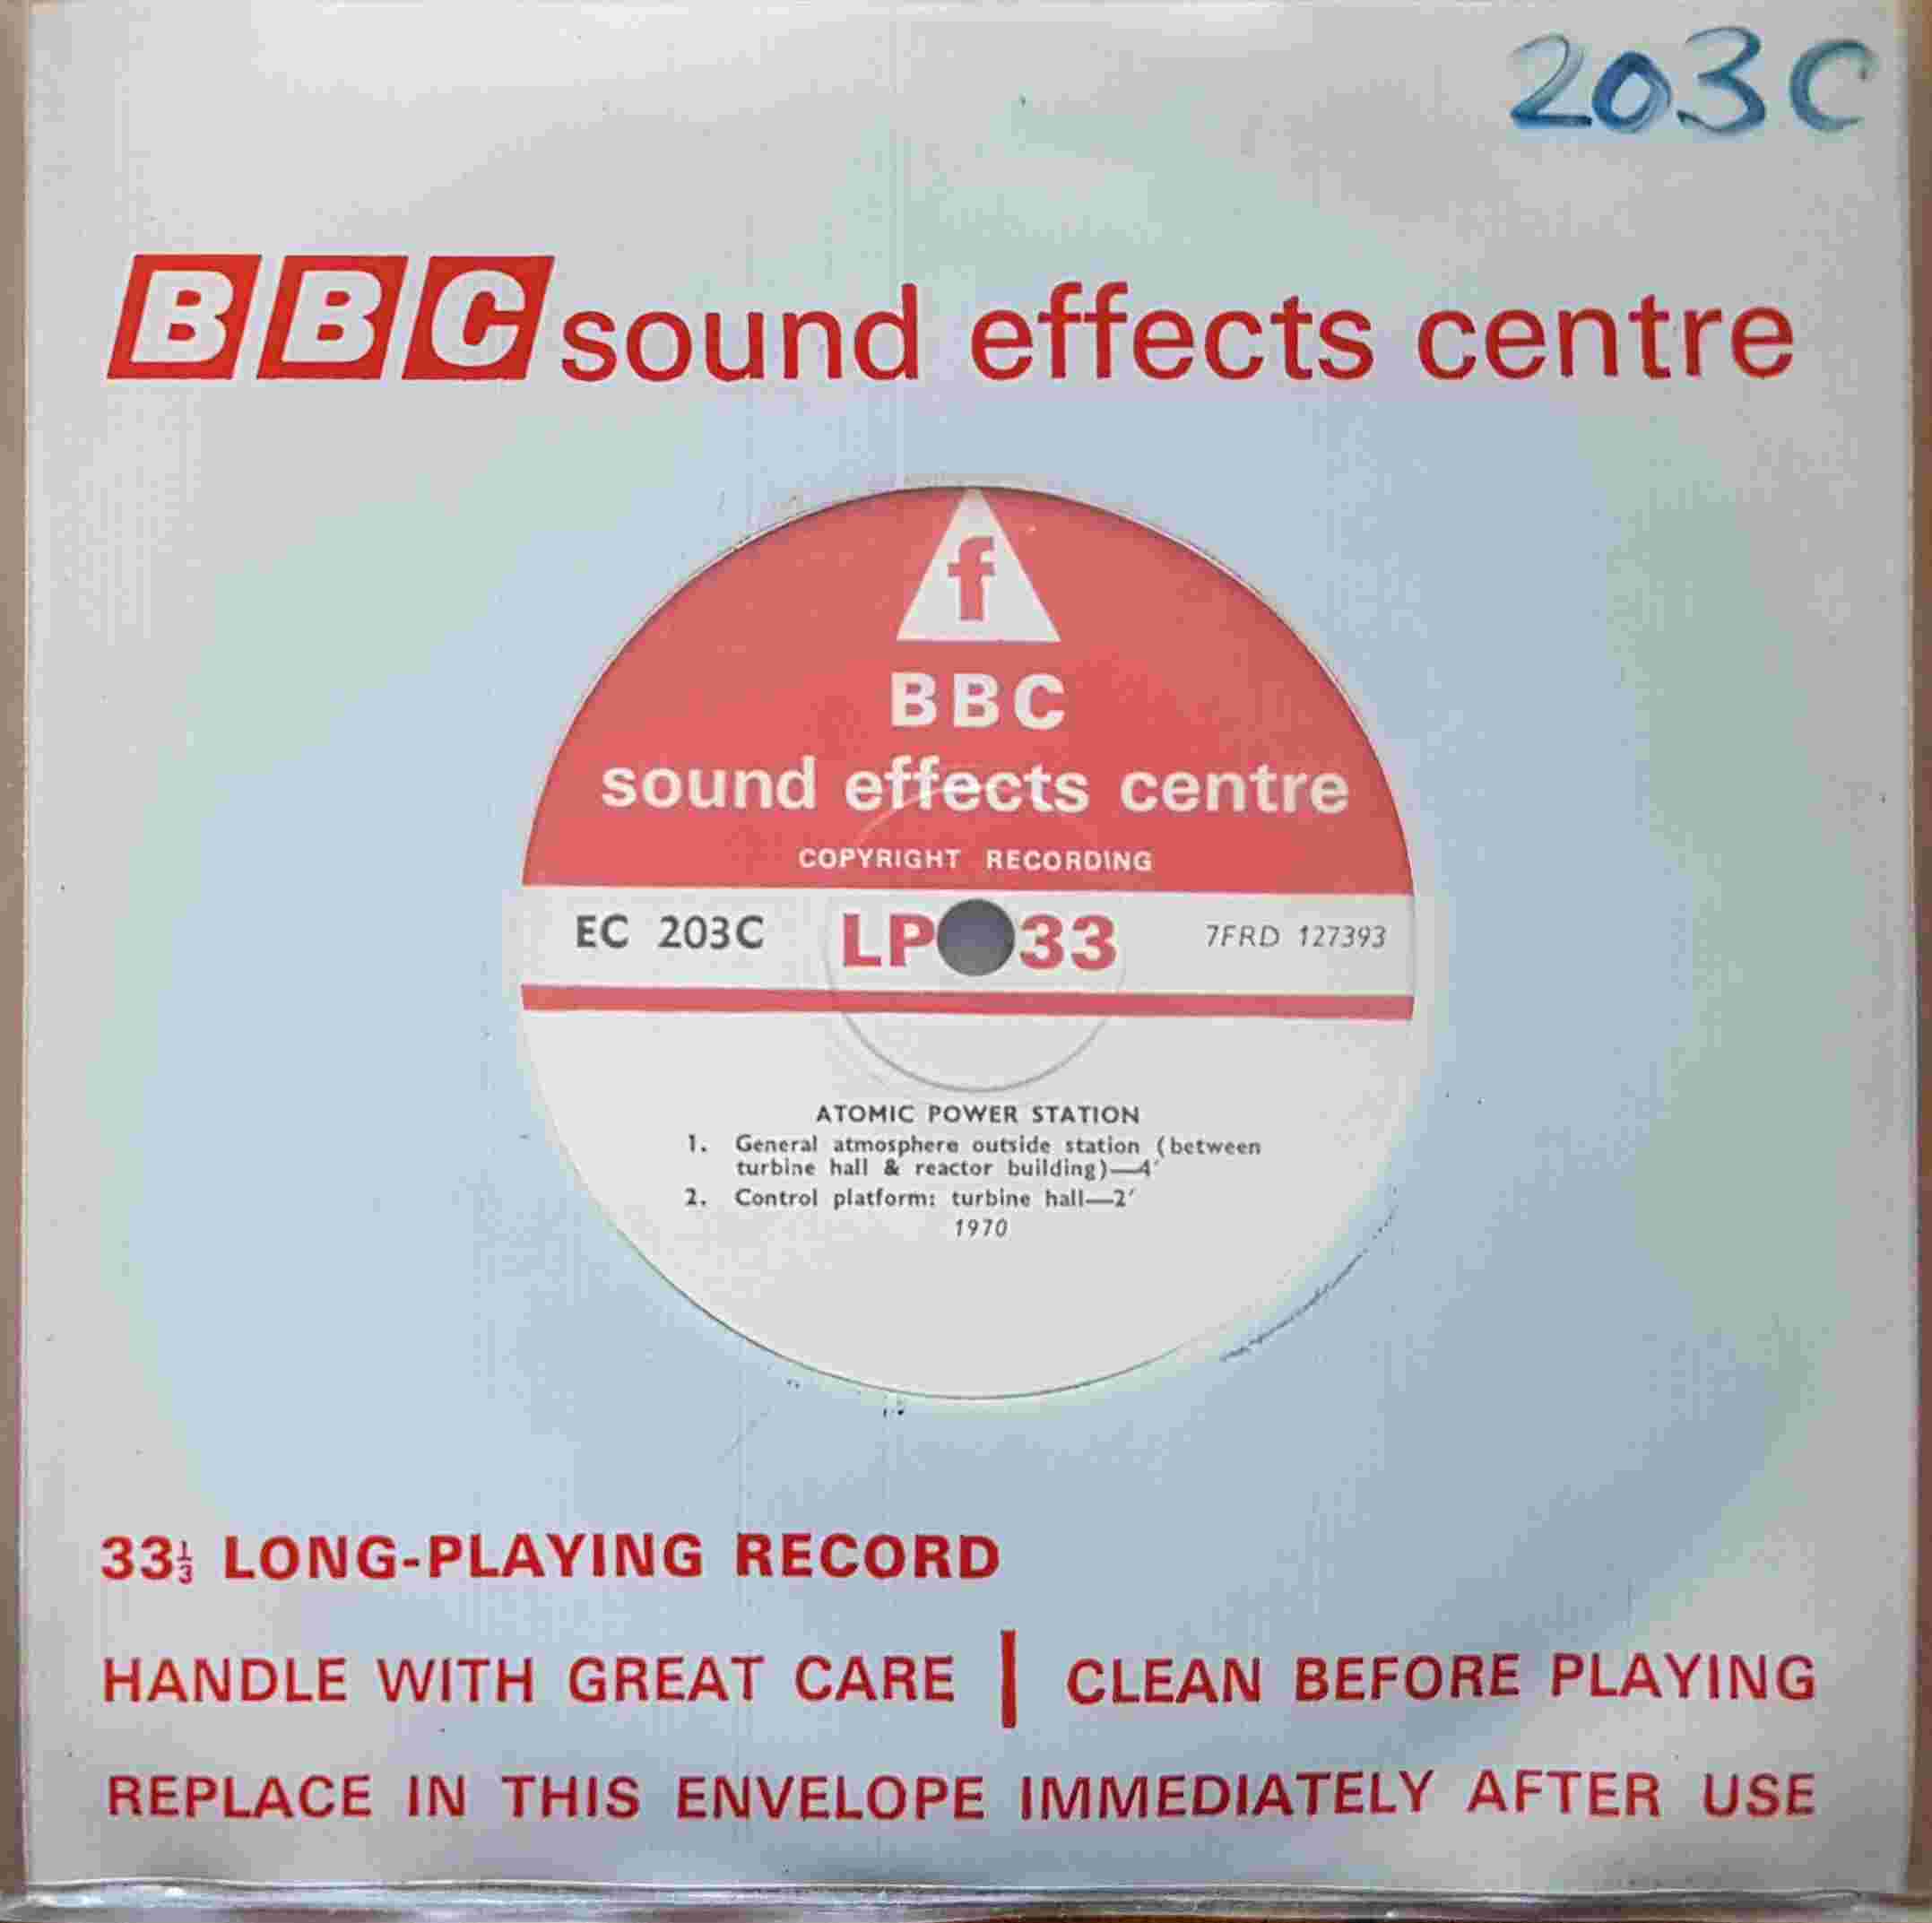 Picture of EC 203C Atomic power station by artist Not registered from the BBC singles - Records and Tapes library